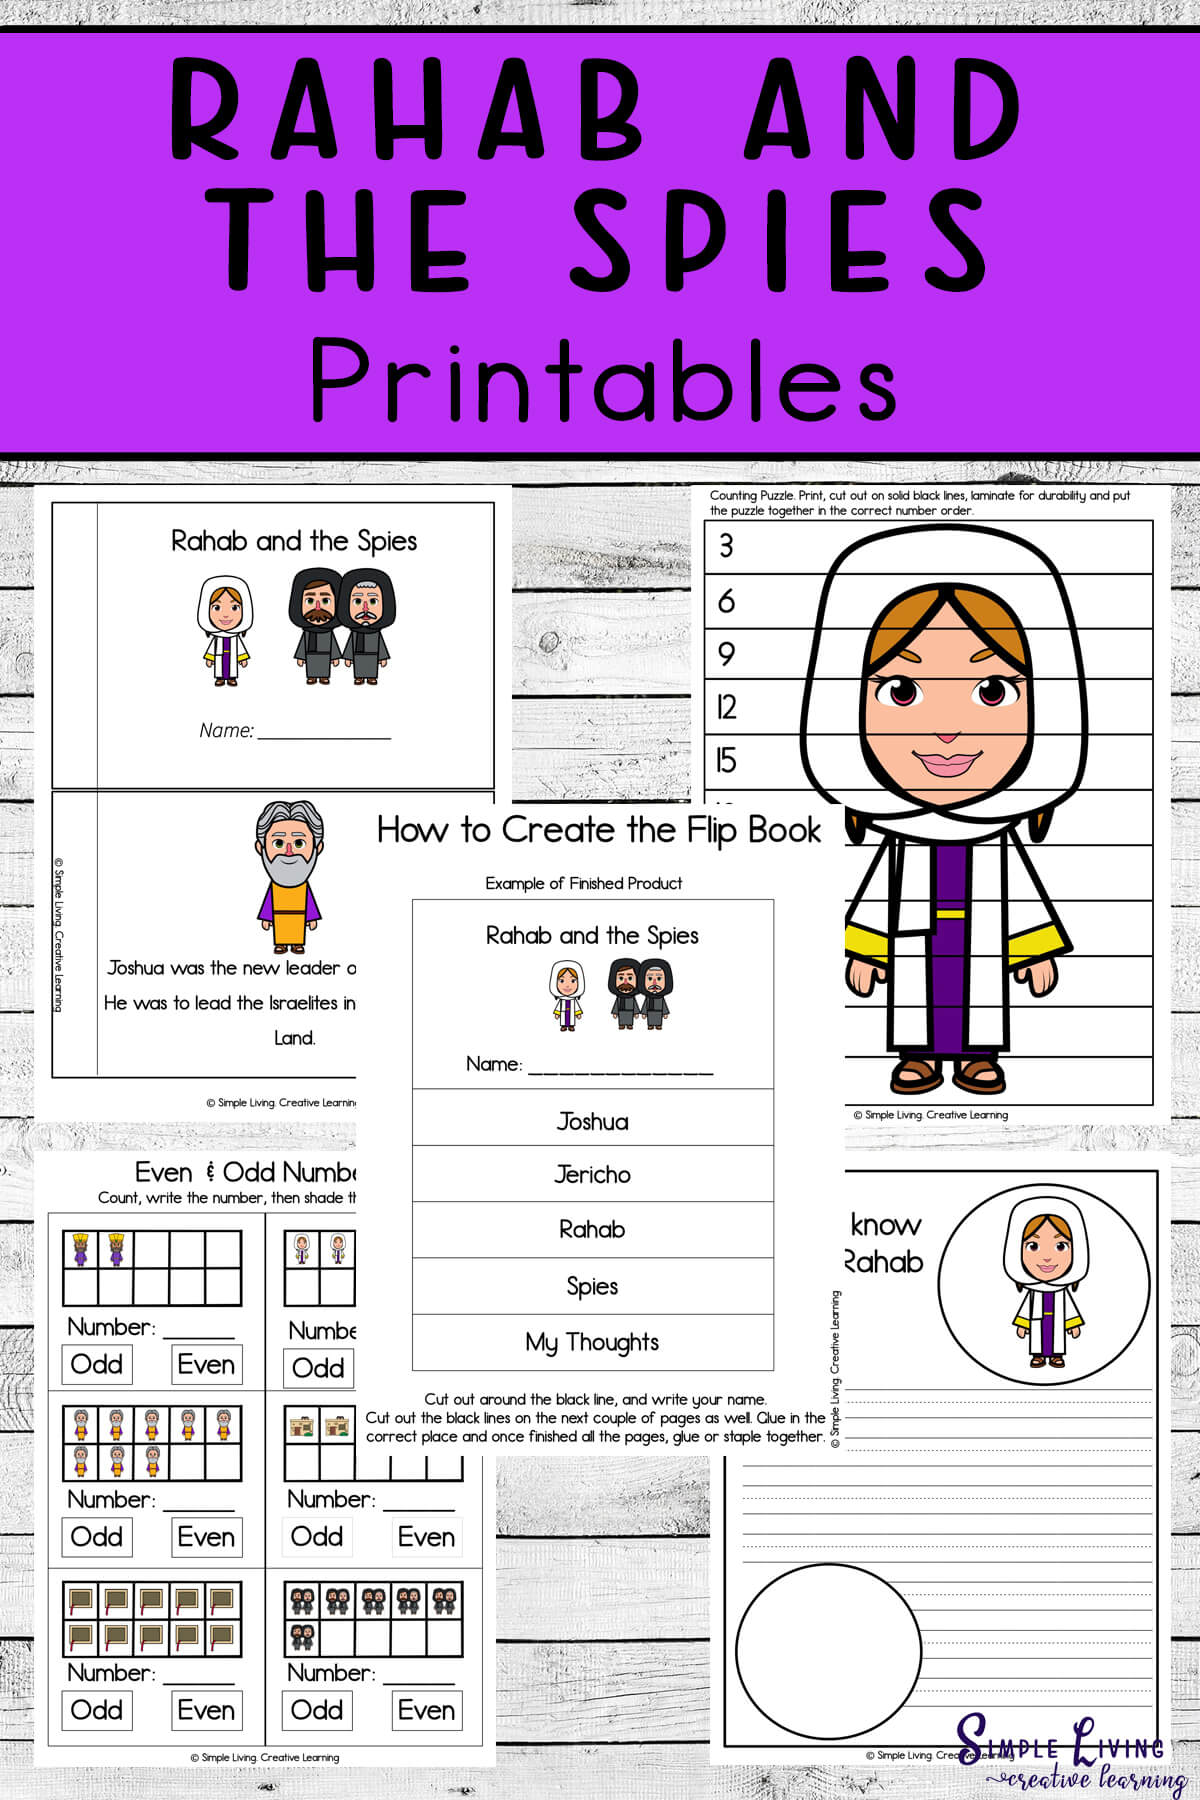 Rehab and the Spies Printables